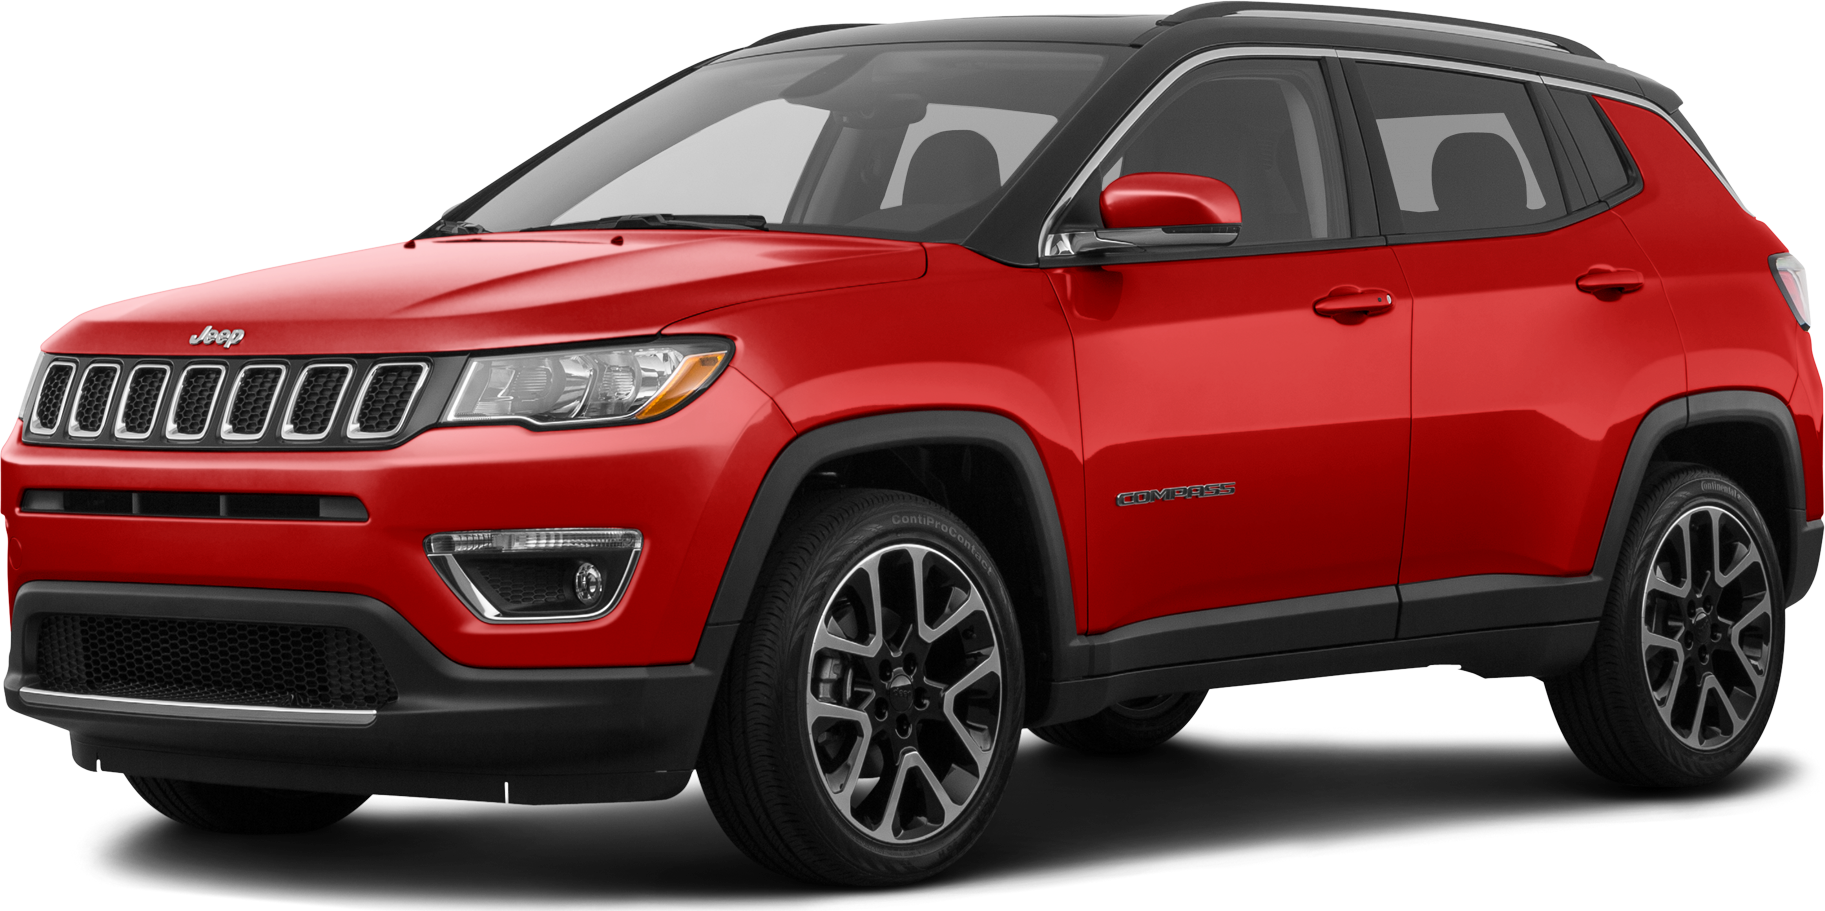 2019 Jeep Compass Values & Cars for Sale | Kelley Blue Book